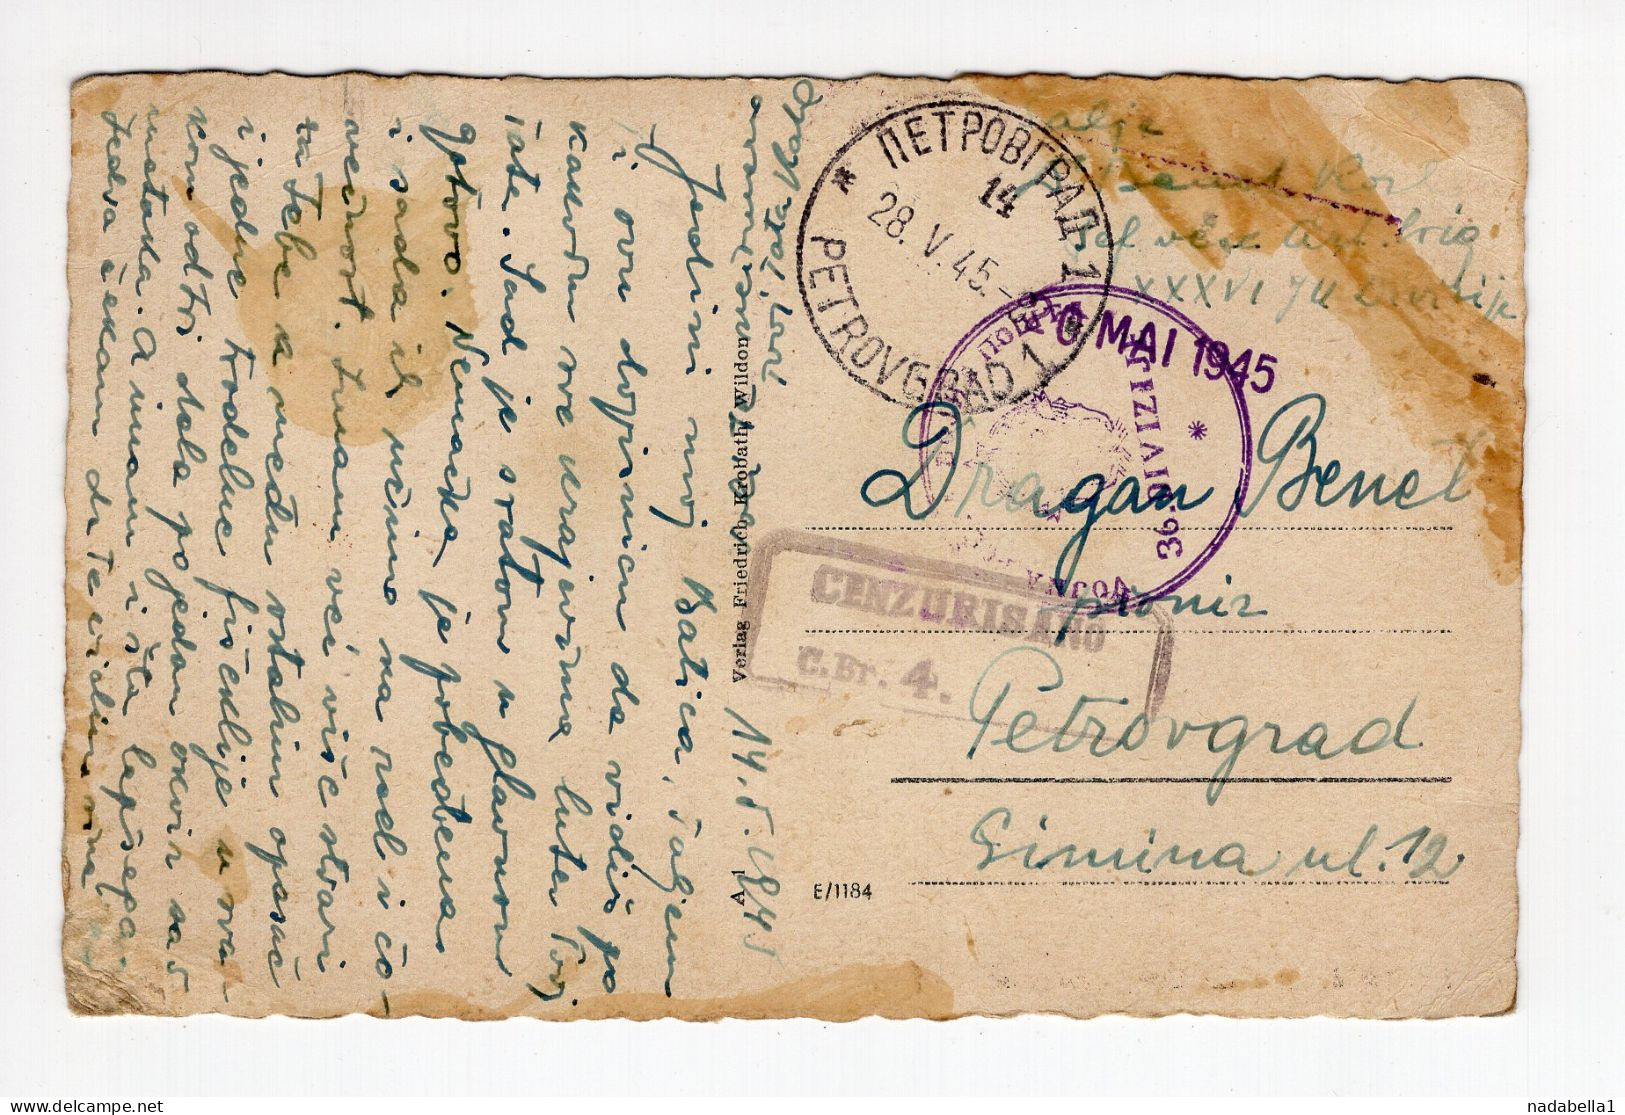 14.5.1945. YUGOSLAVIA,MILITARY,PARTIZAN MAIL,CENSOR,36 DIVISION,FROM FRONT LINE,AUSTRIA? TO SERBIA,POSTCARD,USED - Storia Postale